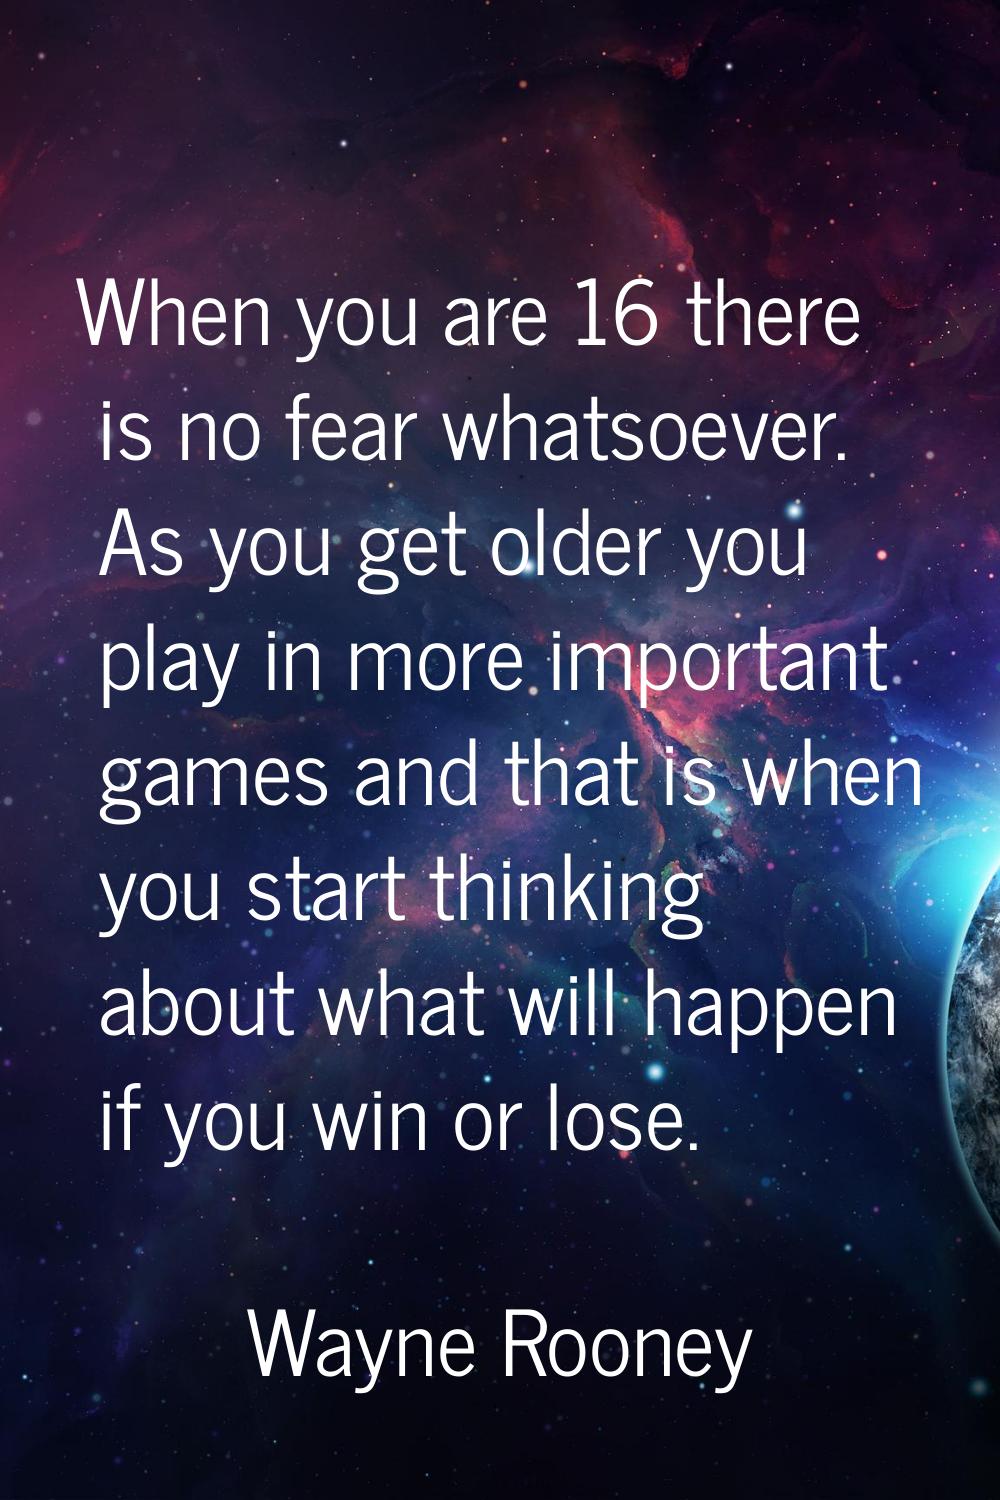 When you are 16 there is no fear whatsoever. As you get older you play in more important games and 